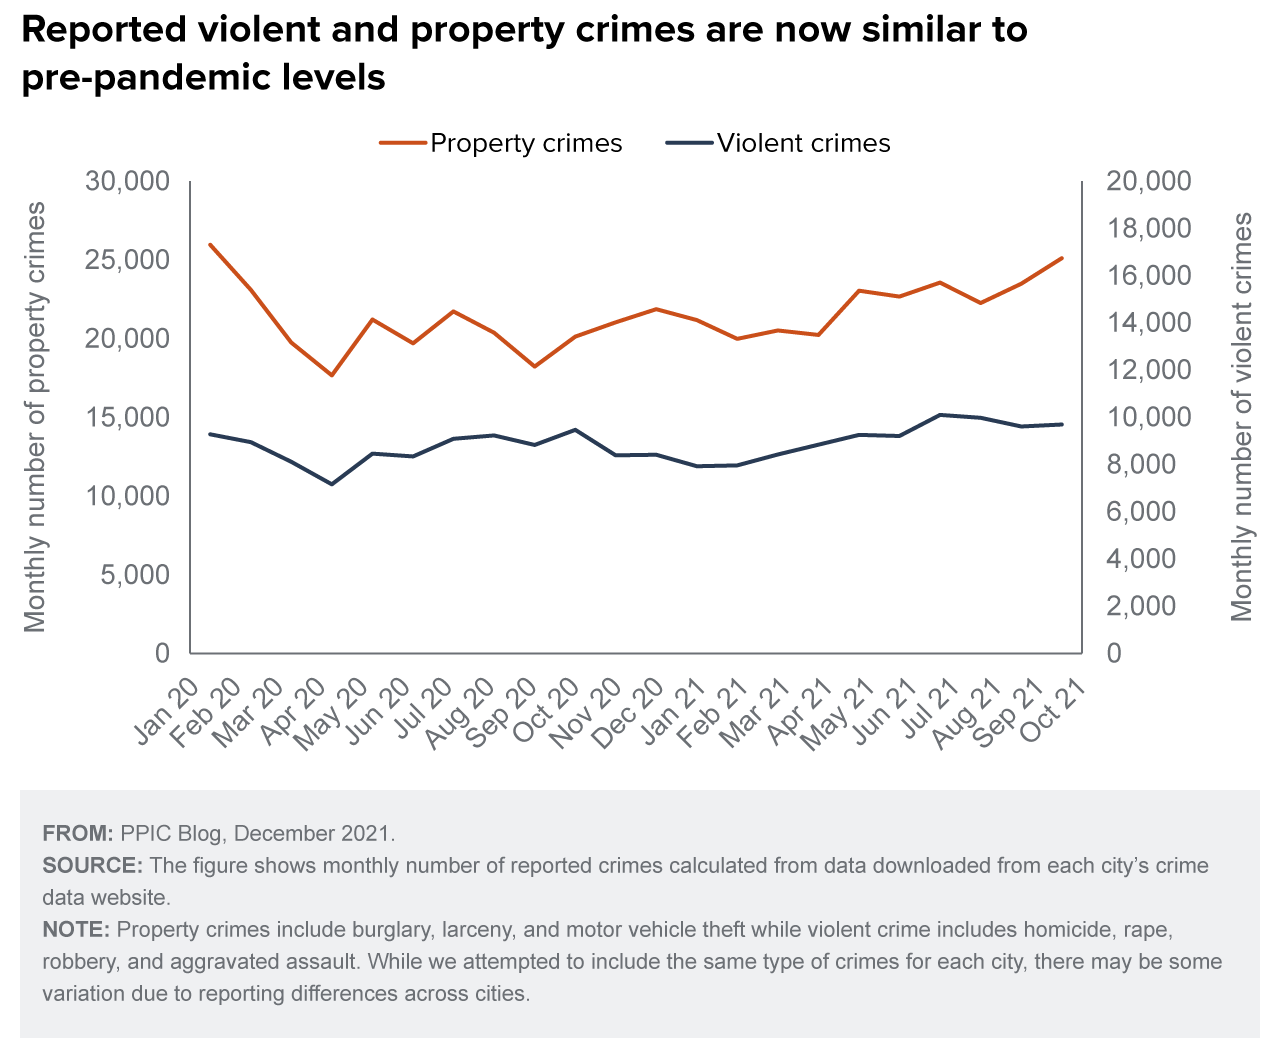 figure - Reported violent and property crimes are now similar to pre-pandemic levels